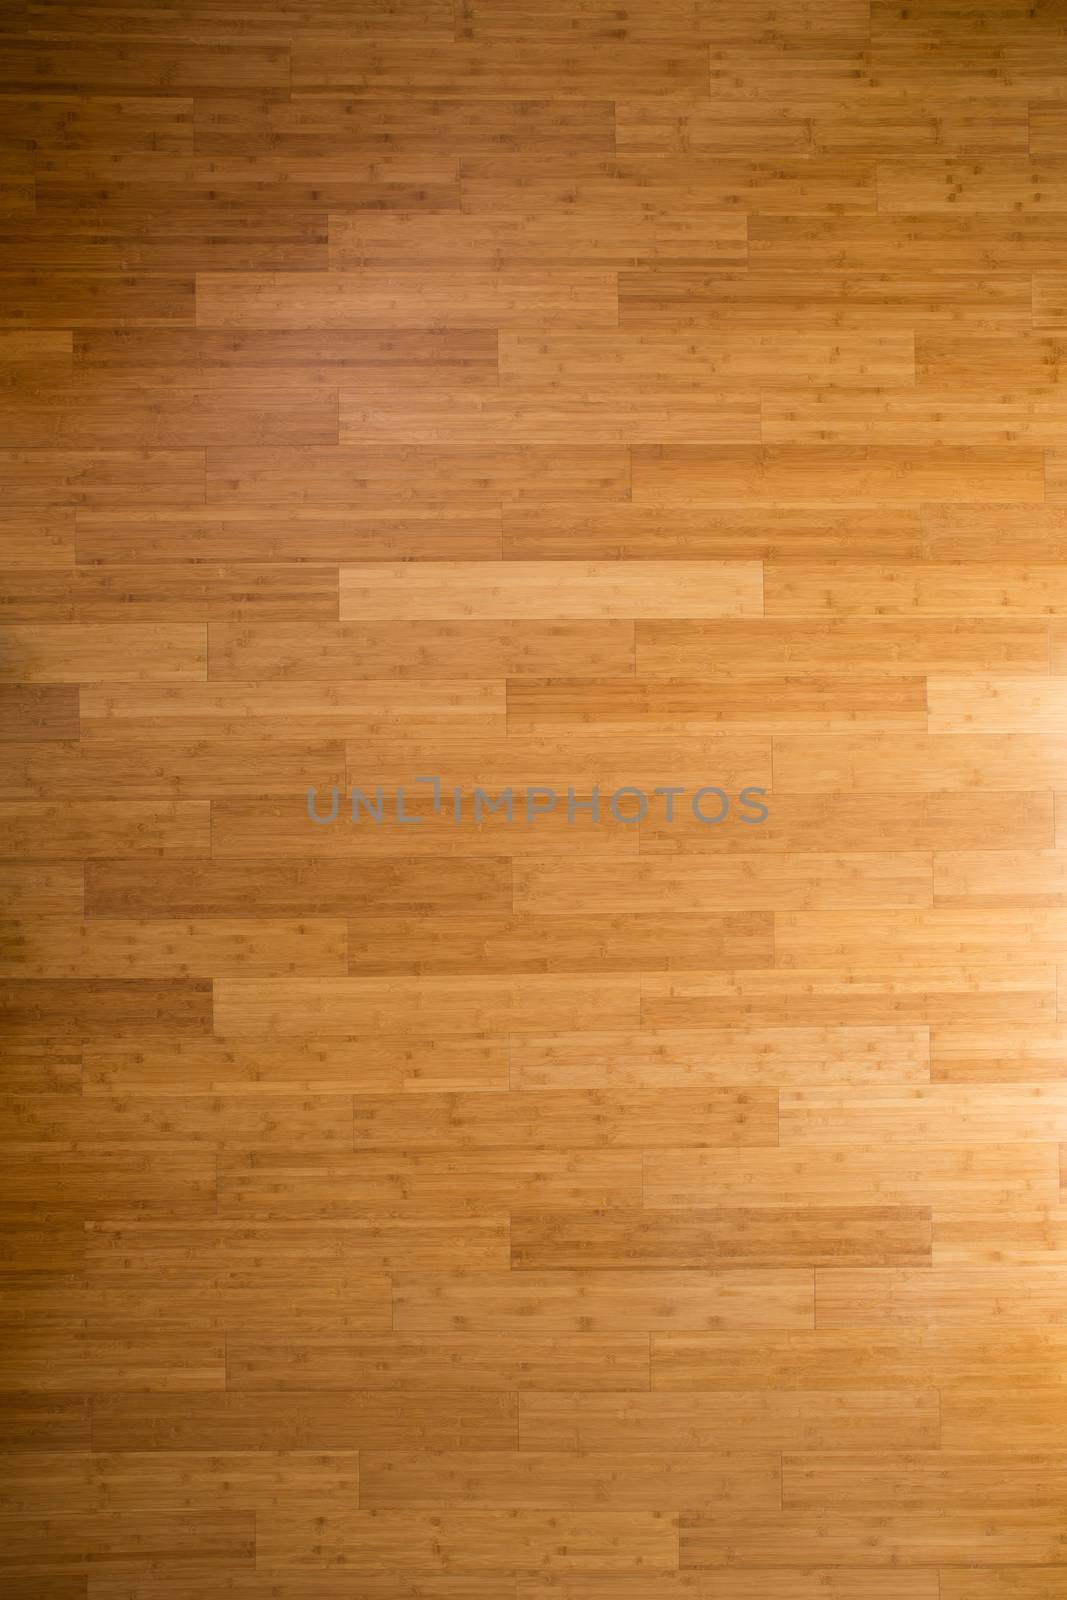 Background texture of a wooden bamboo floor with laminated floorboards, viewed overhead with side lighting and a gradient for an architectural or interior decor theme